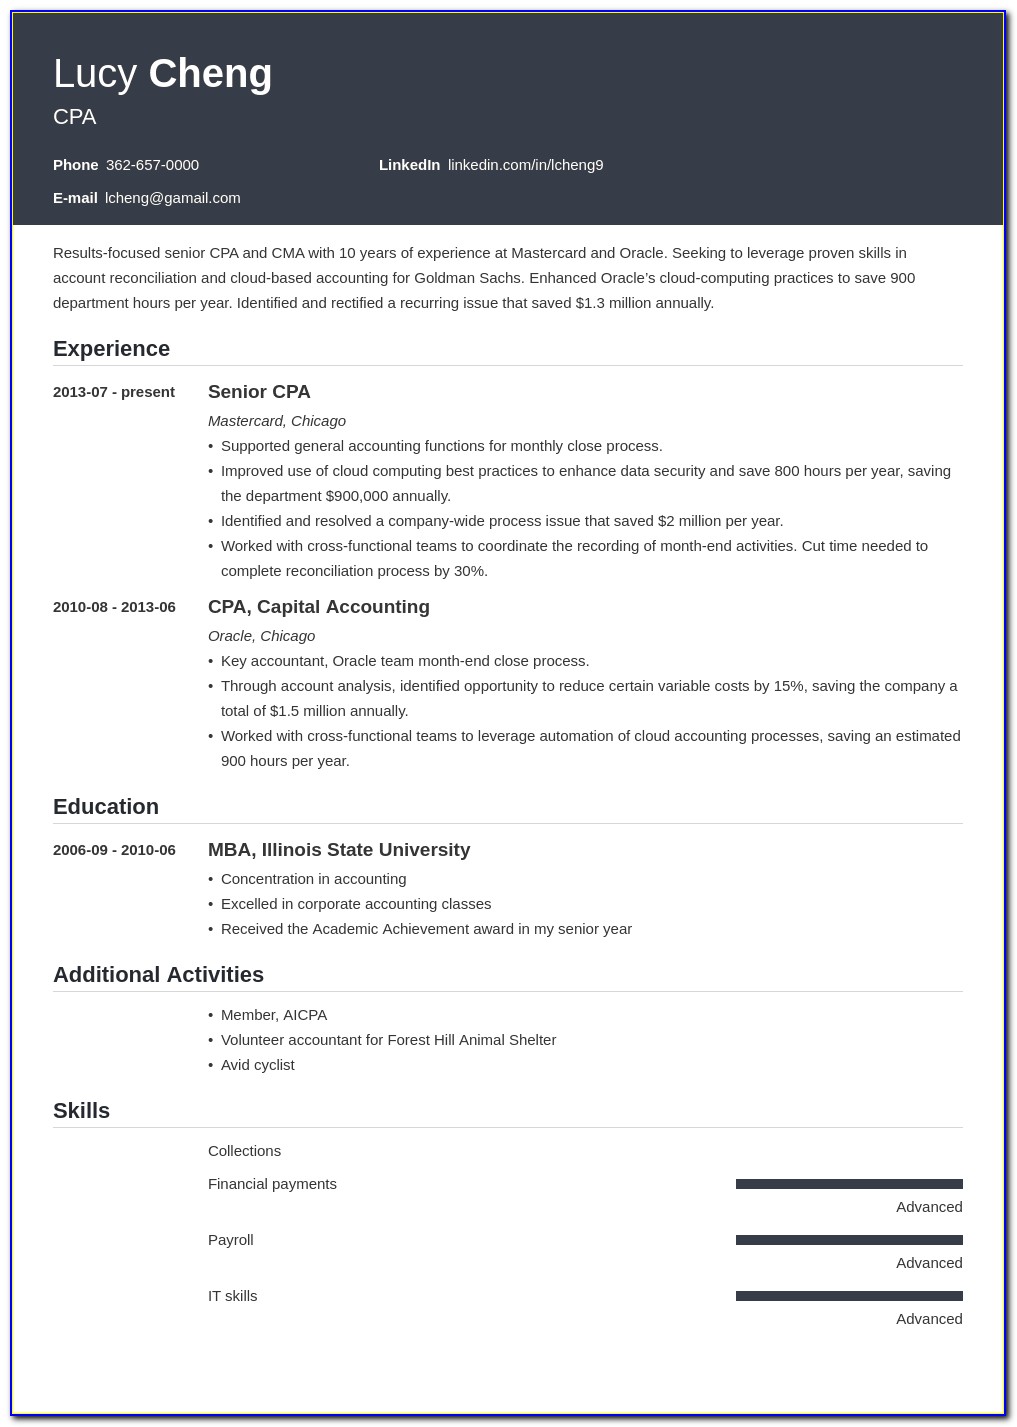 Resume Samples For Experienced Professionals